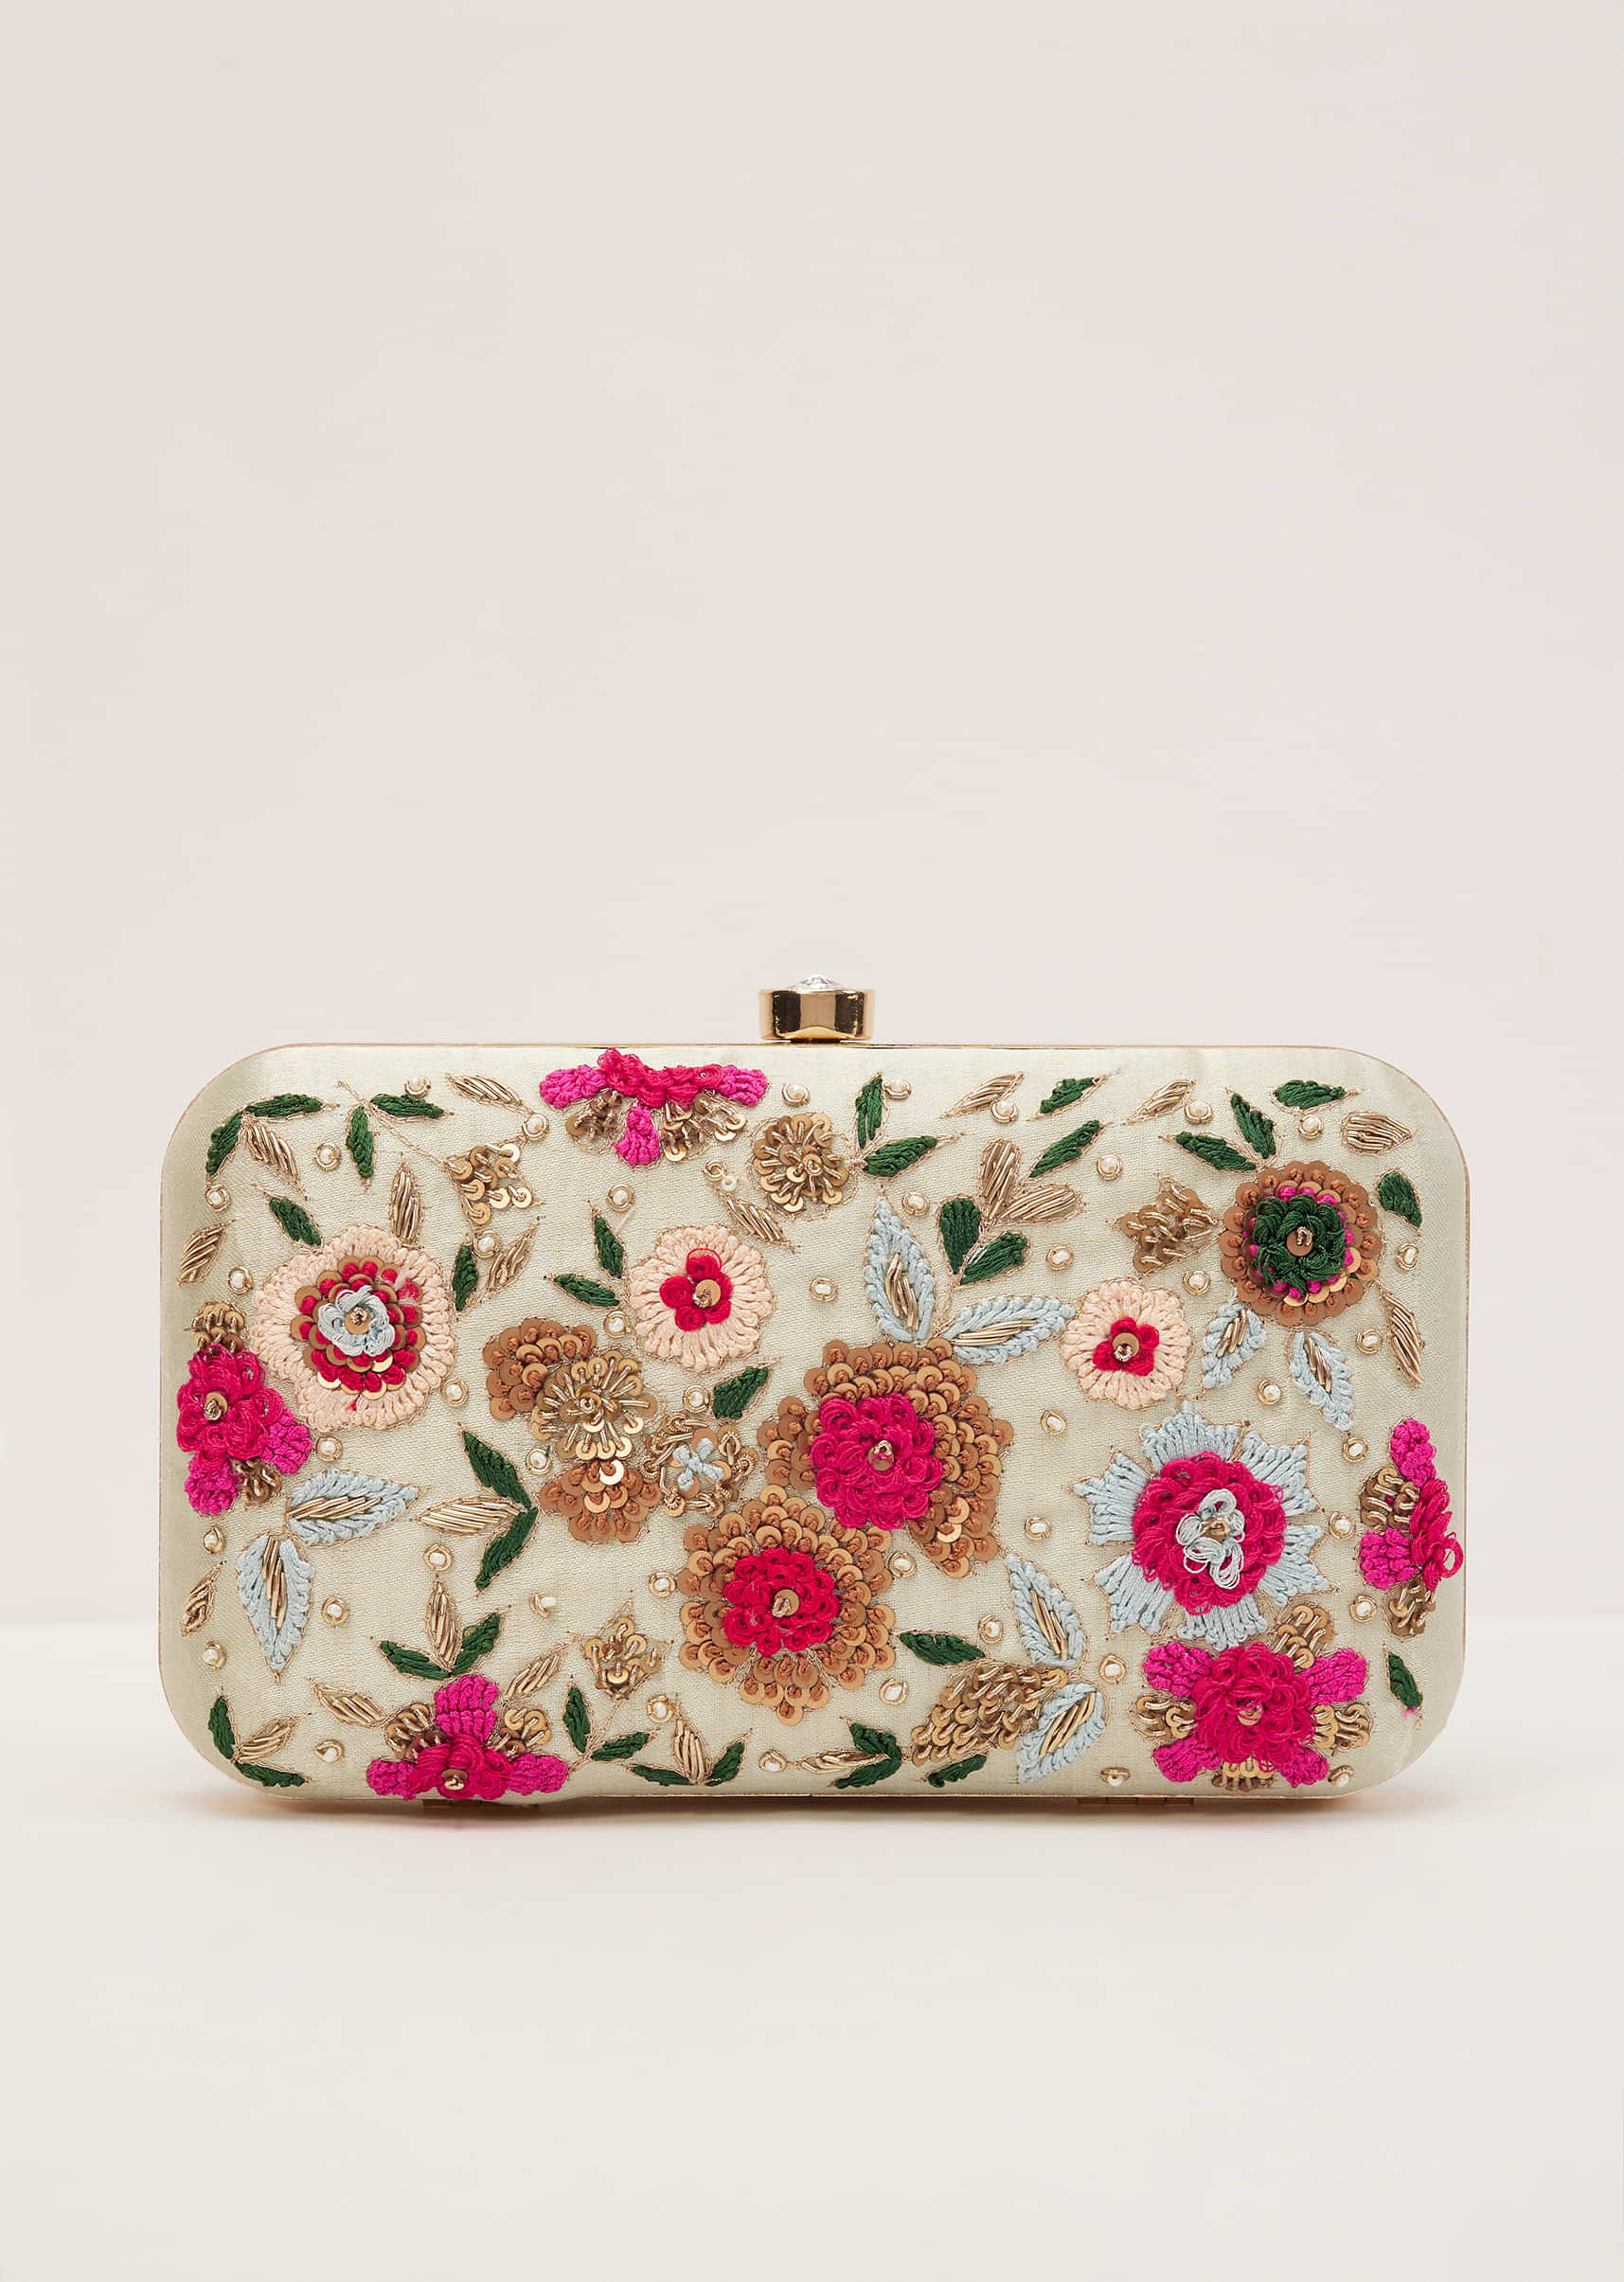 Floral Embroidered Clutch With Powder Green Silk Base